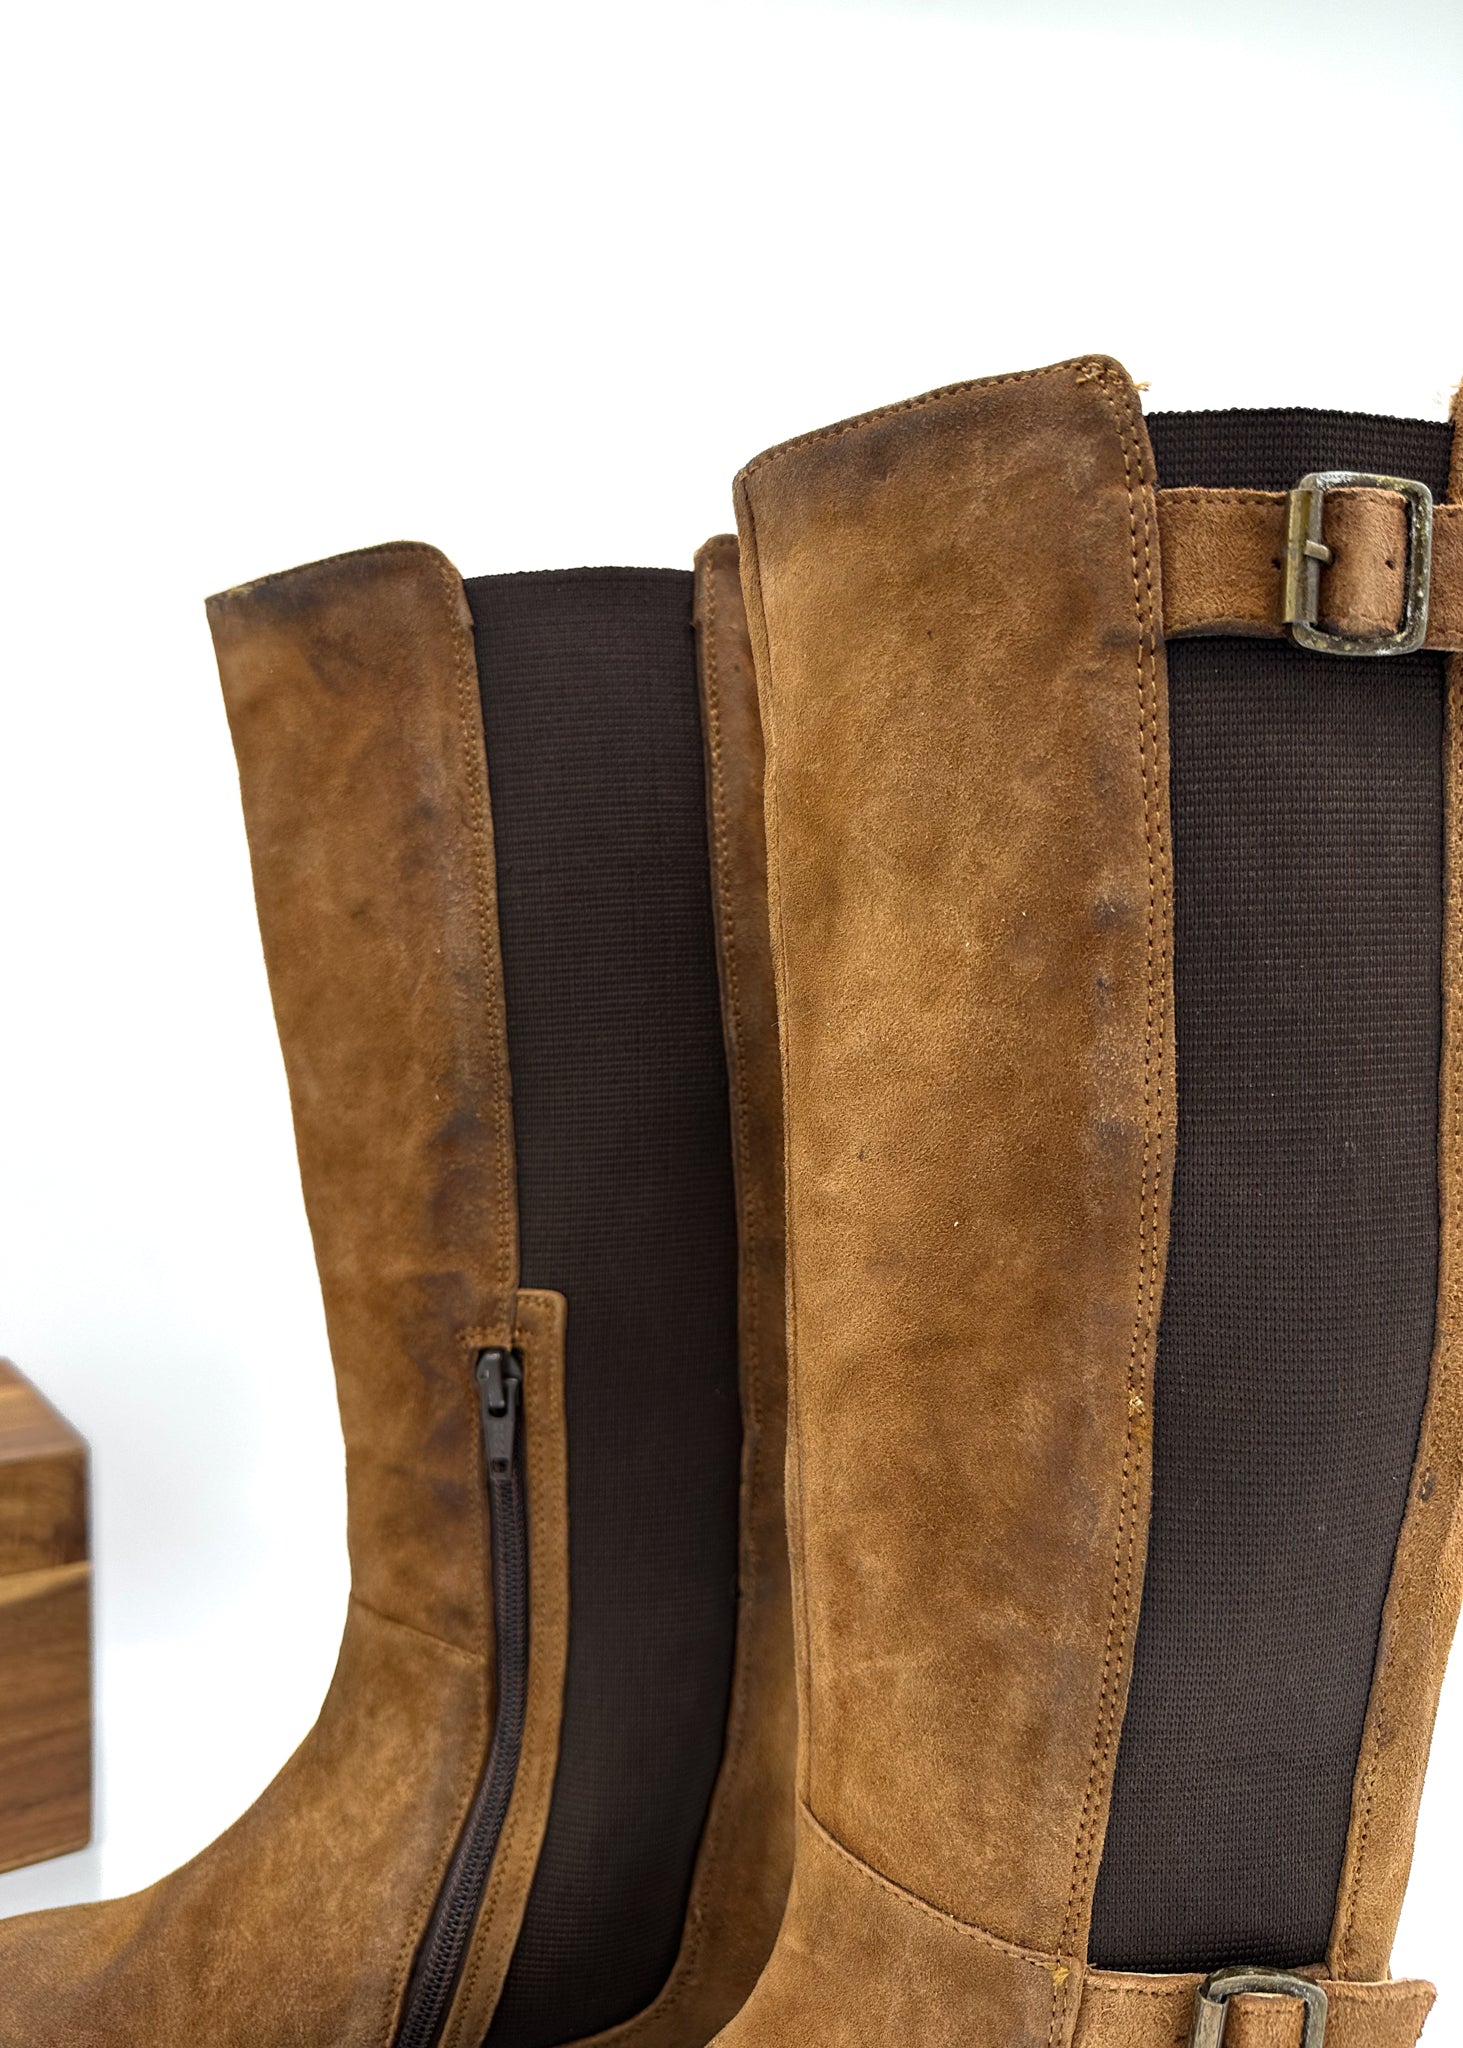 Mitchell Tall Leather Boot in Brown